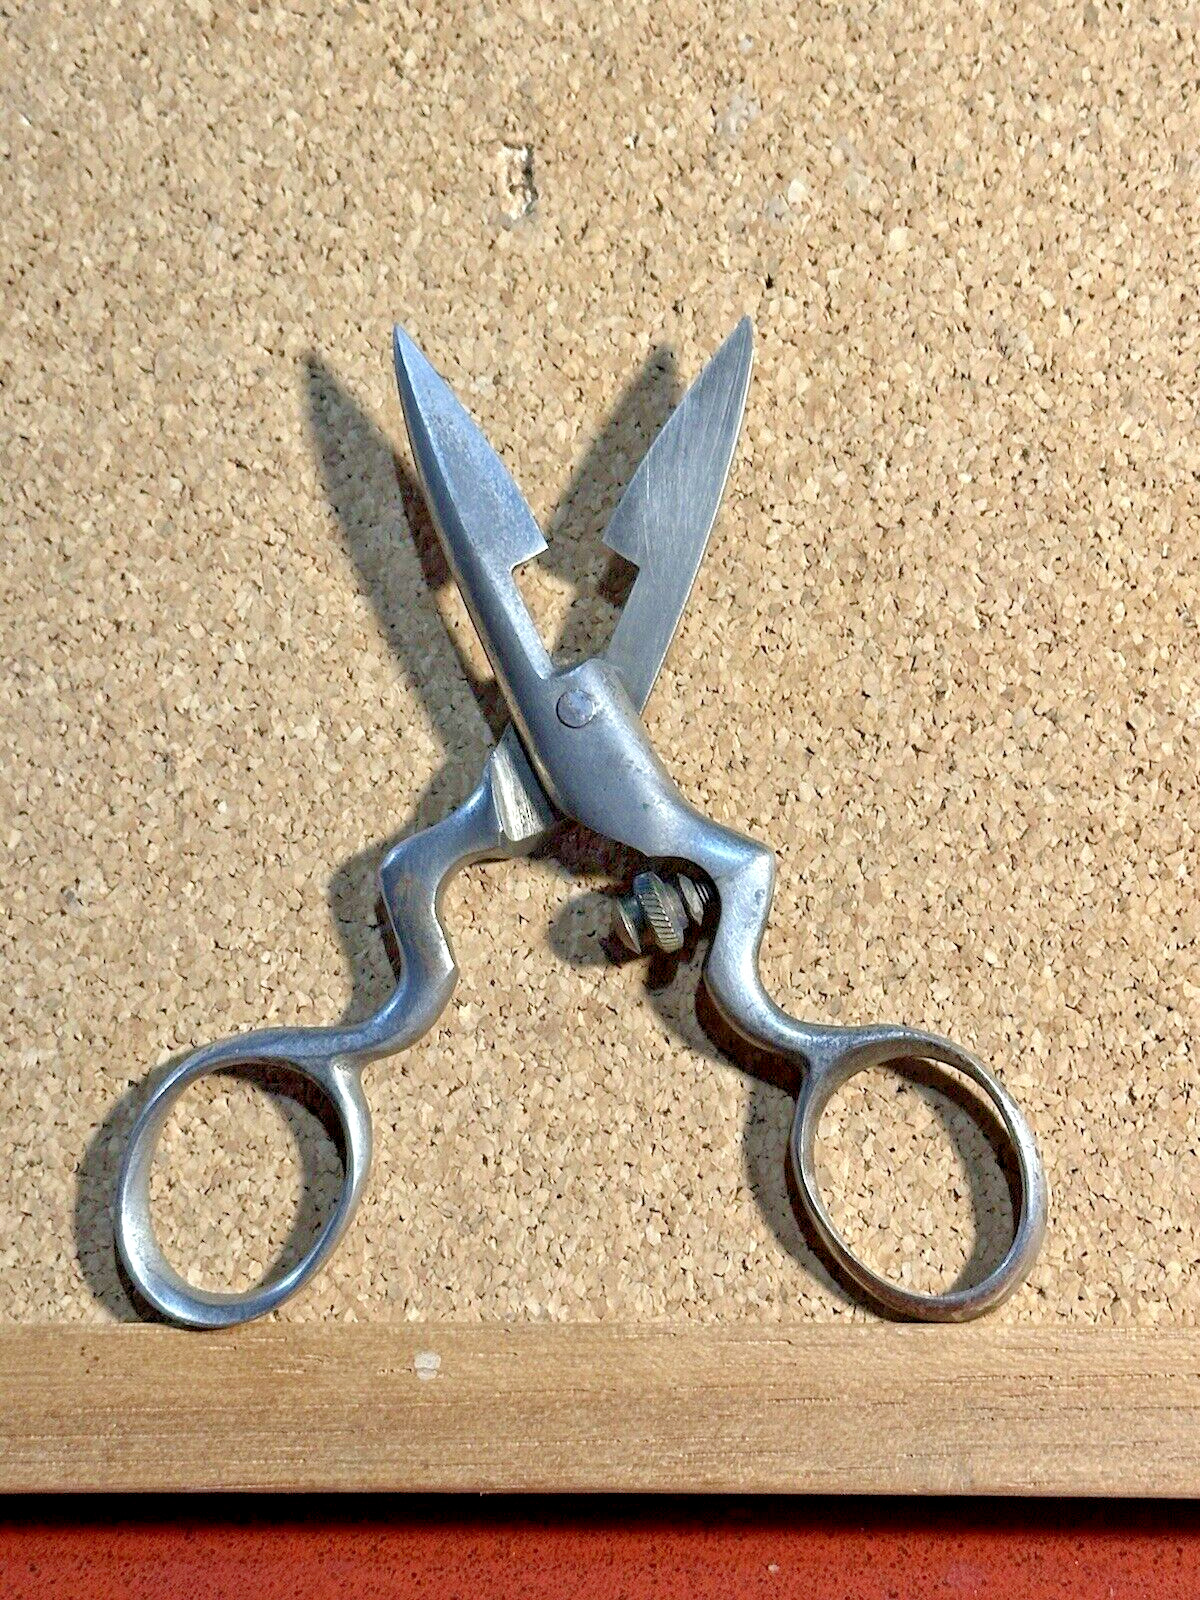 VINTAGE 1940’S 4.5” METAL BUTTON HOLE SCISSORS MARKED NO. 154 SEWING TOOL